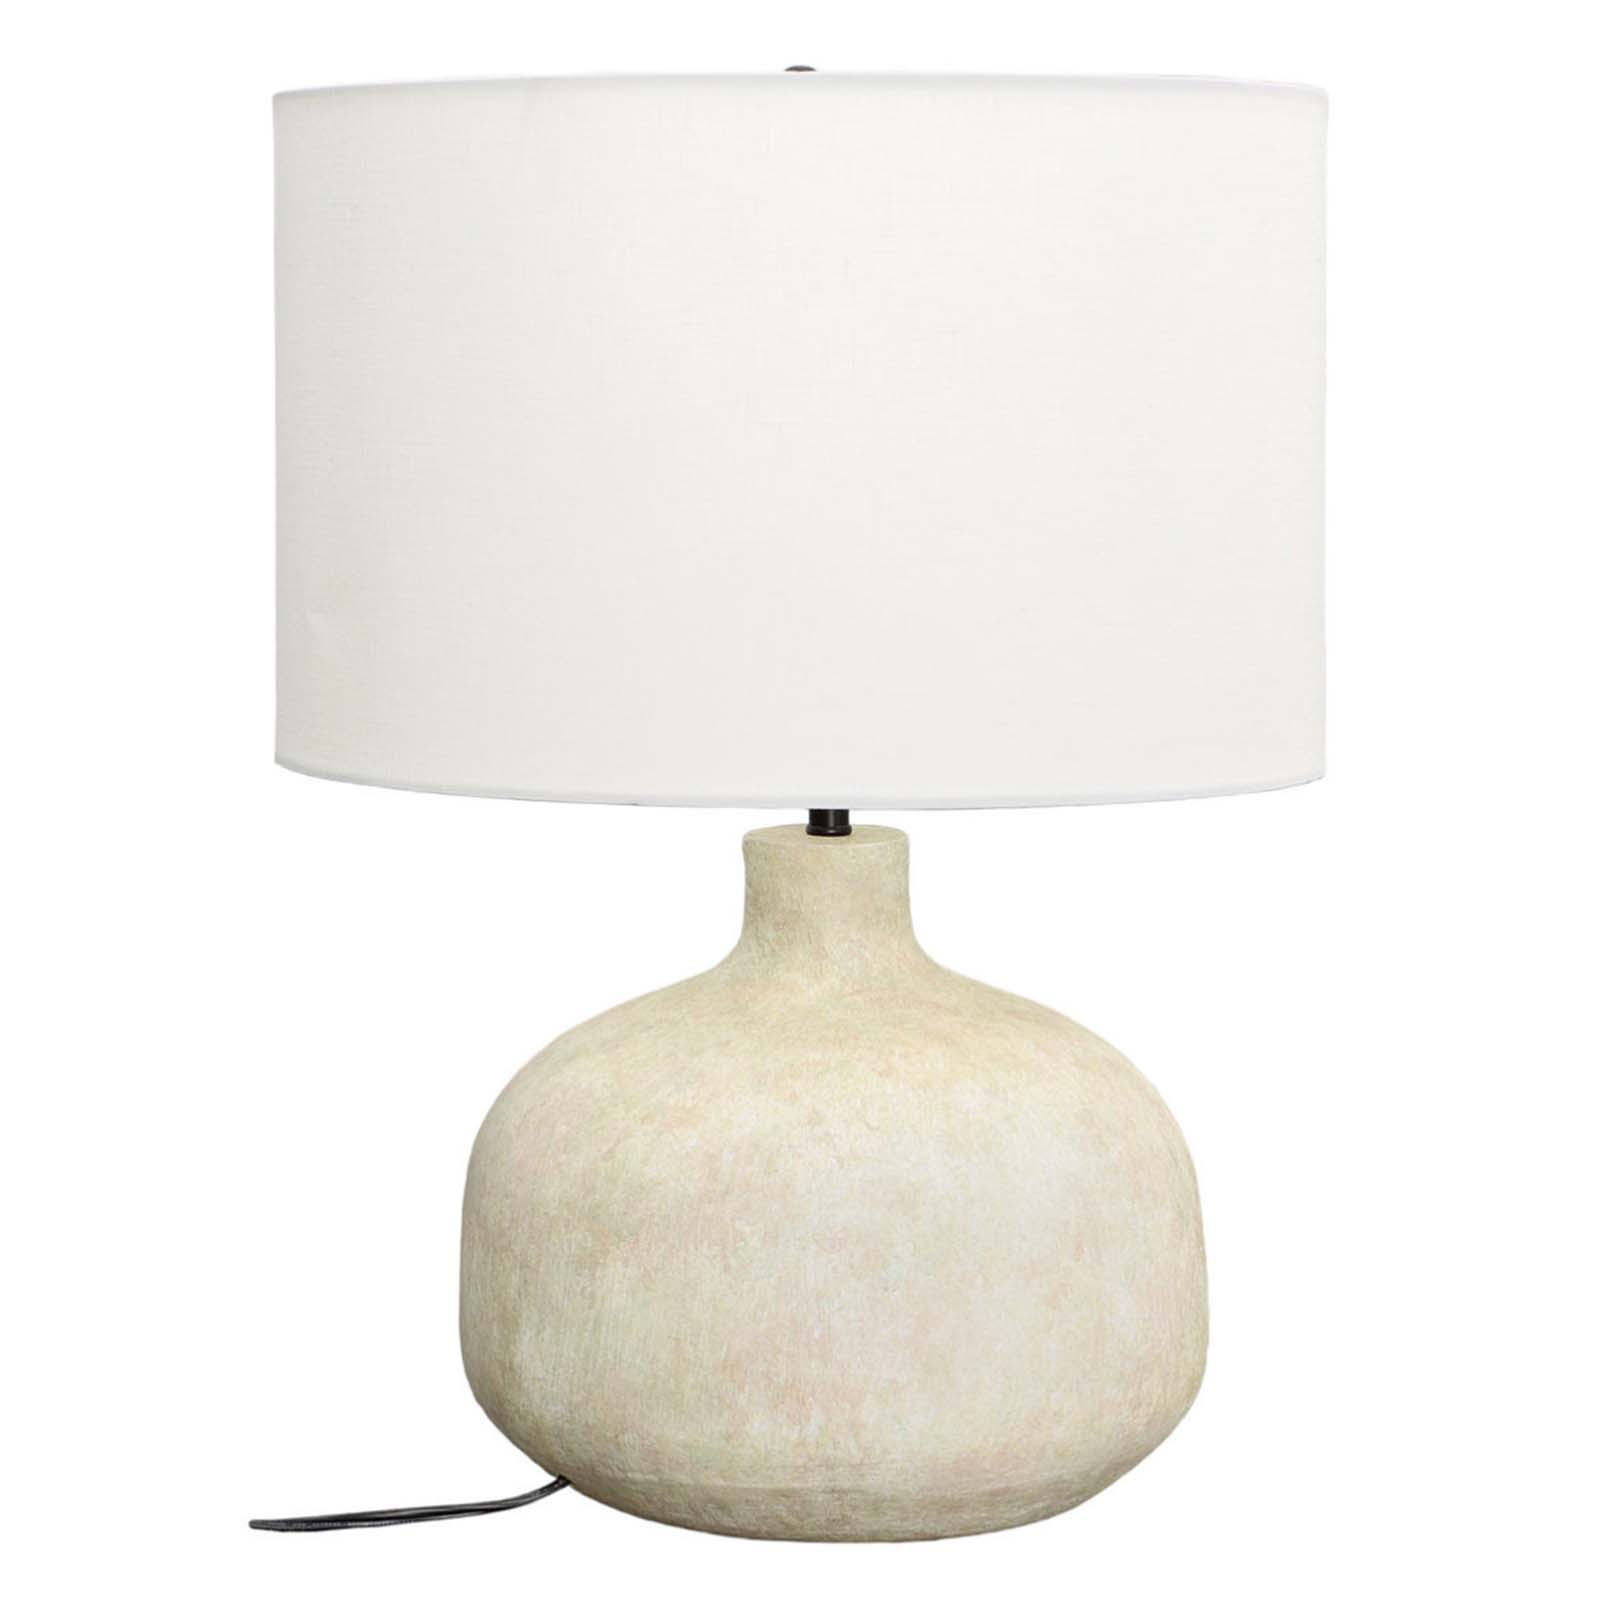 Violet Table Lamp